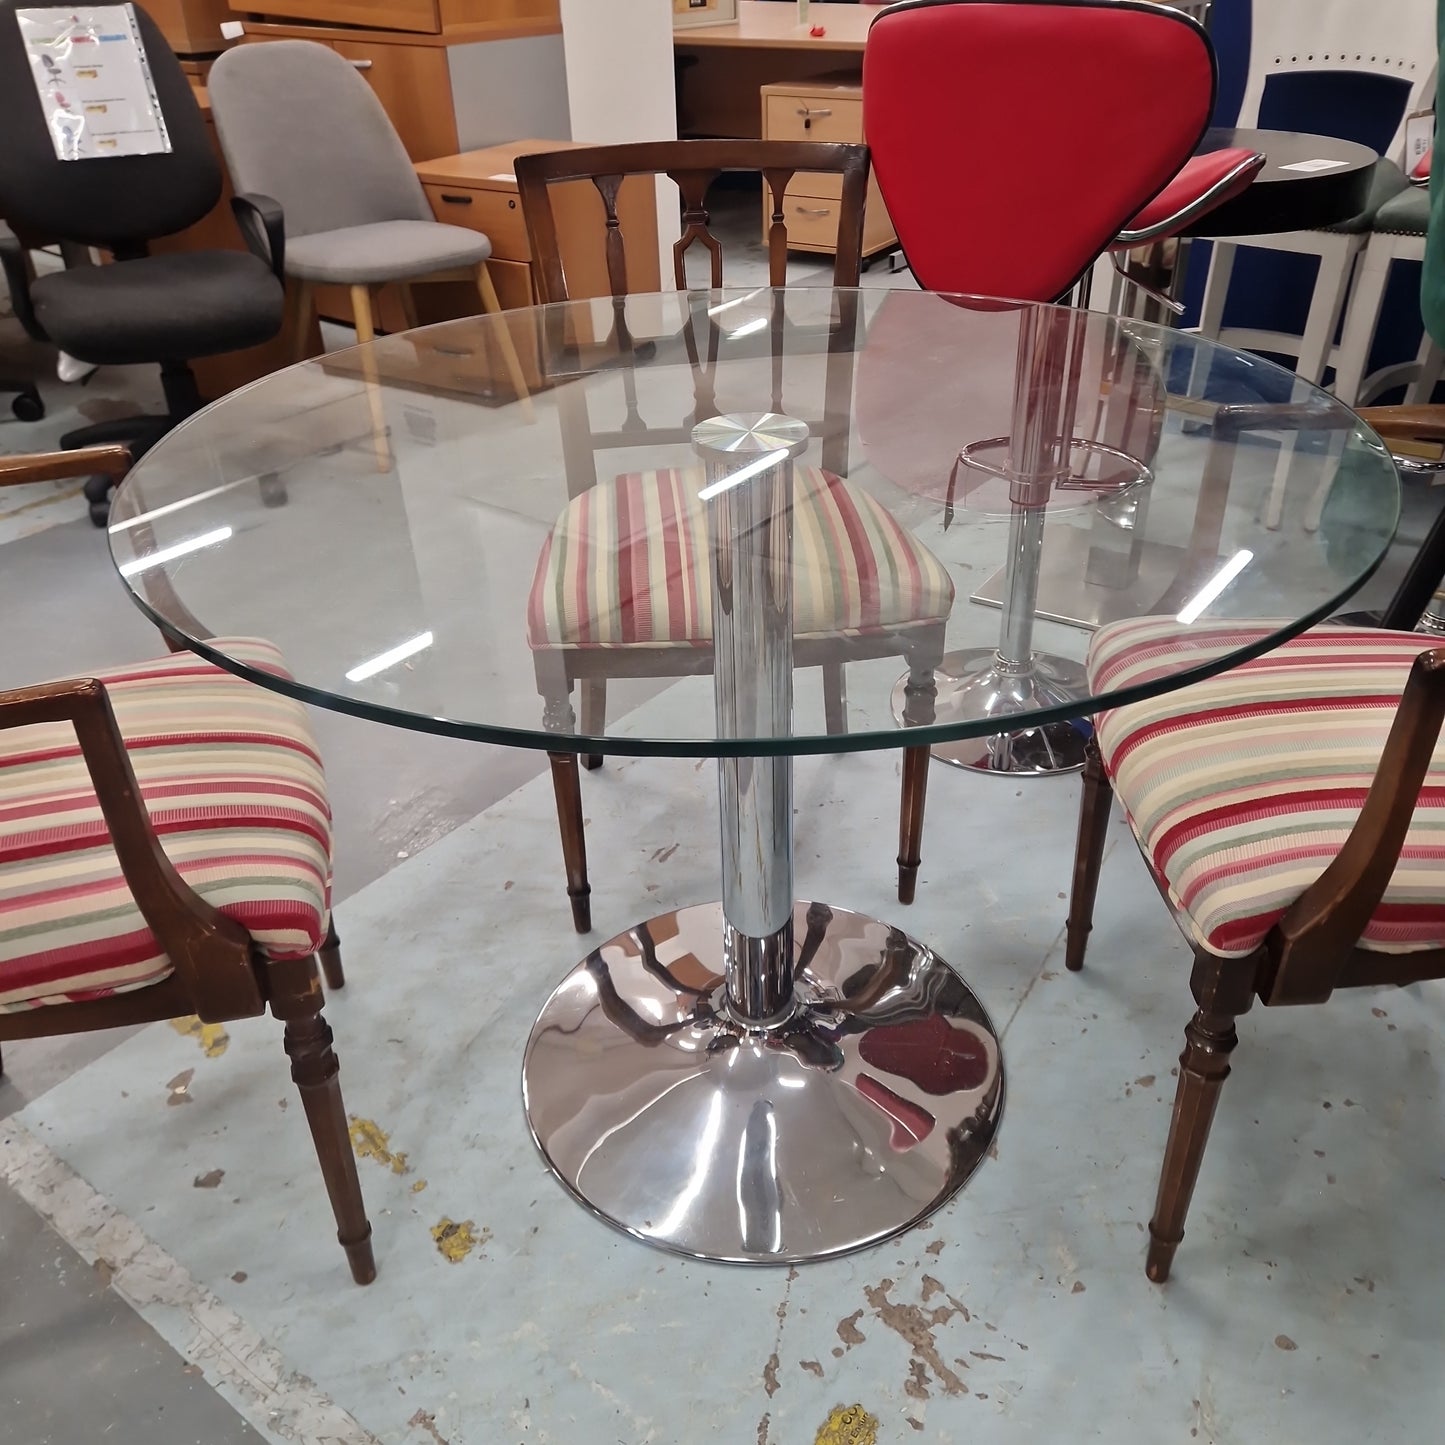 1000 wide toughened glass circular table with polished metal central base